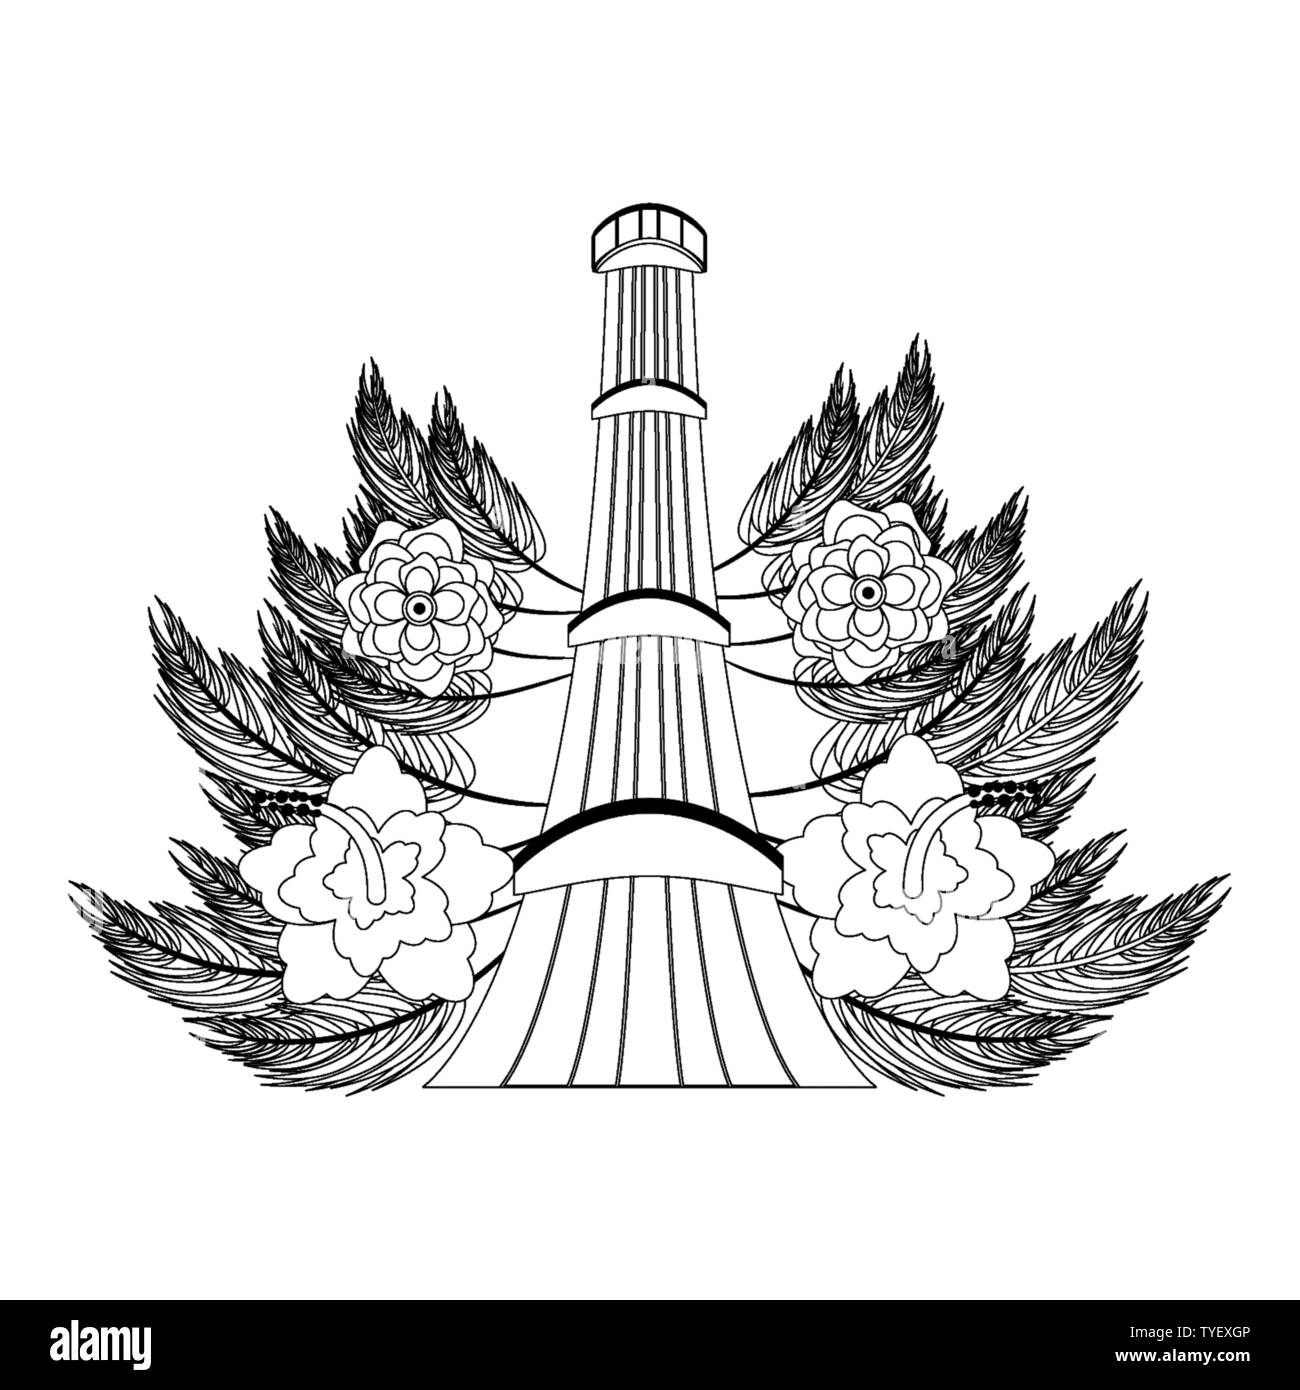 indian building monuments icon cartoon in black and white Stock Vector